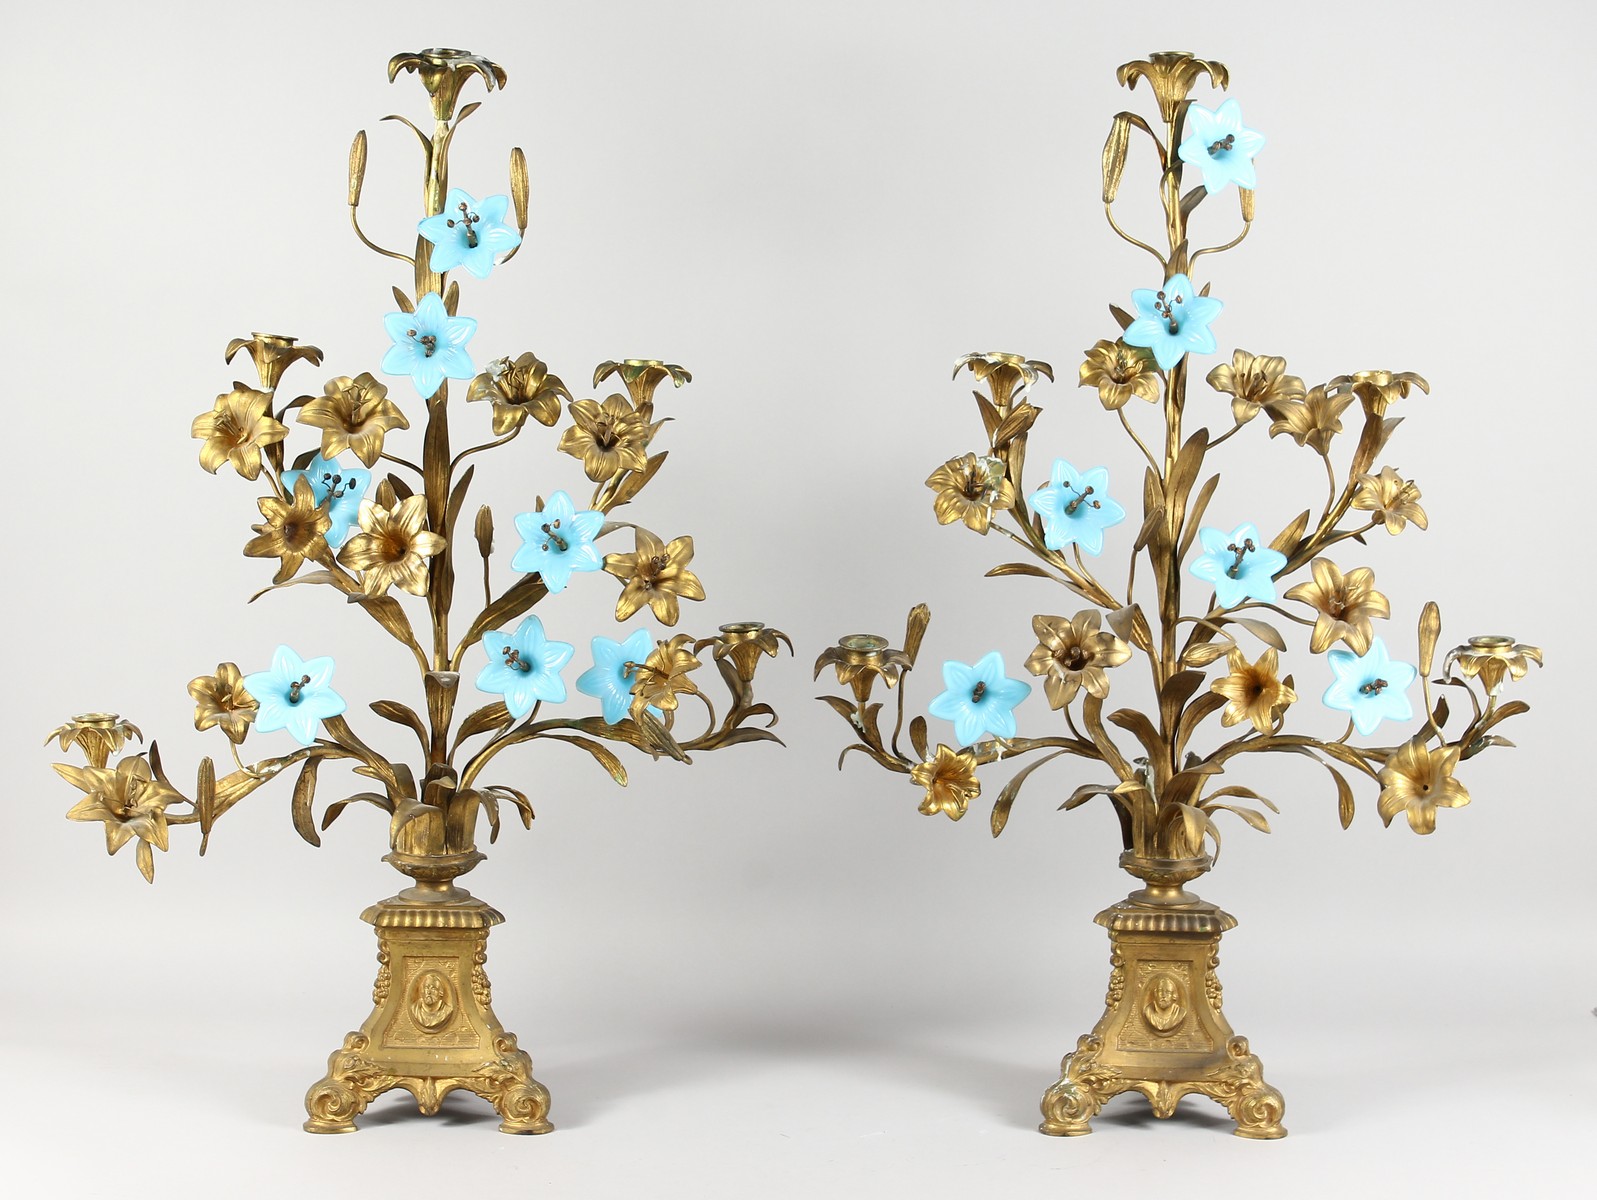 A PAIR OF 19TH CENTURY ORMOLU CANDELABRA, of naturalistic form, with leaves and flowers, the stems